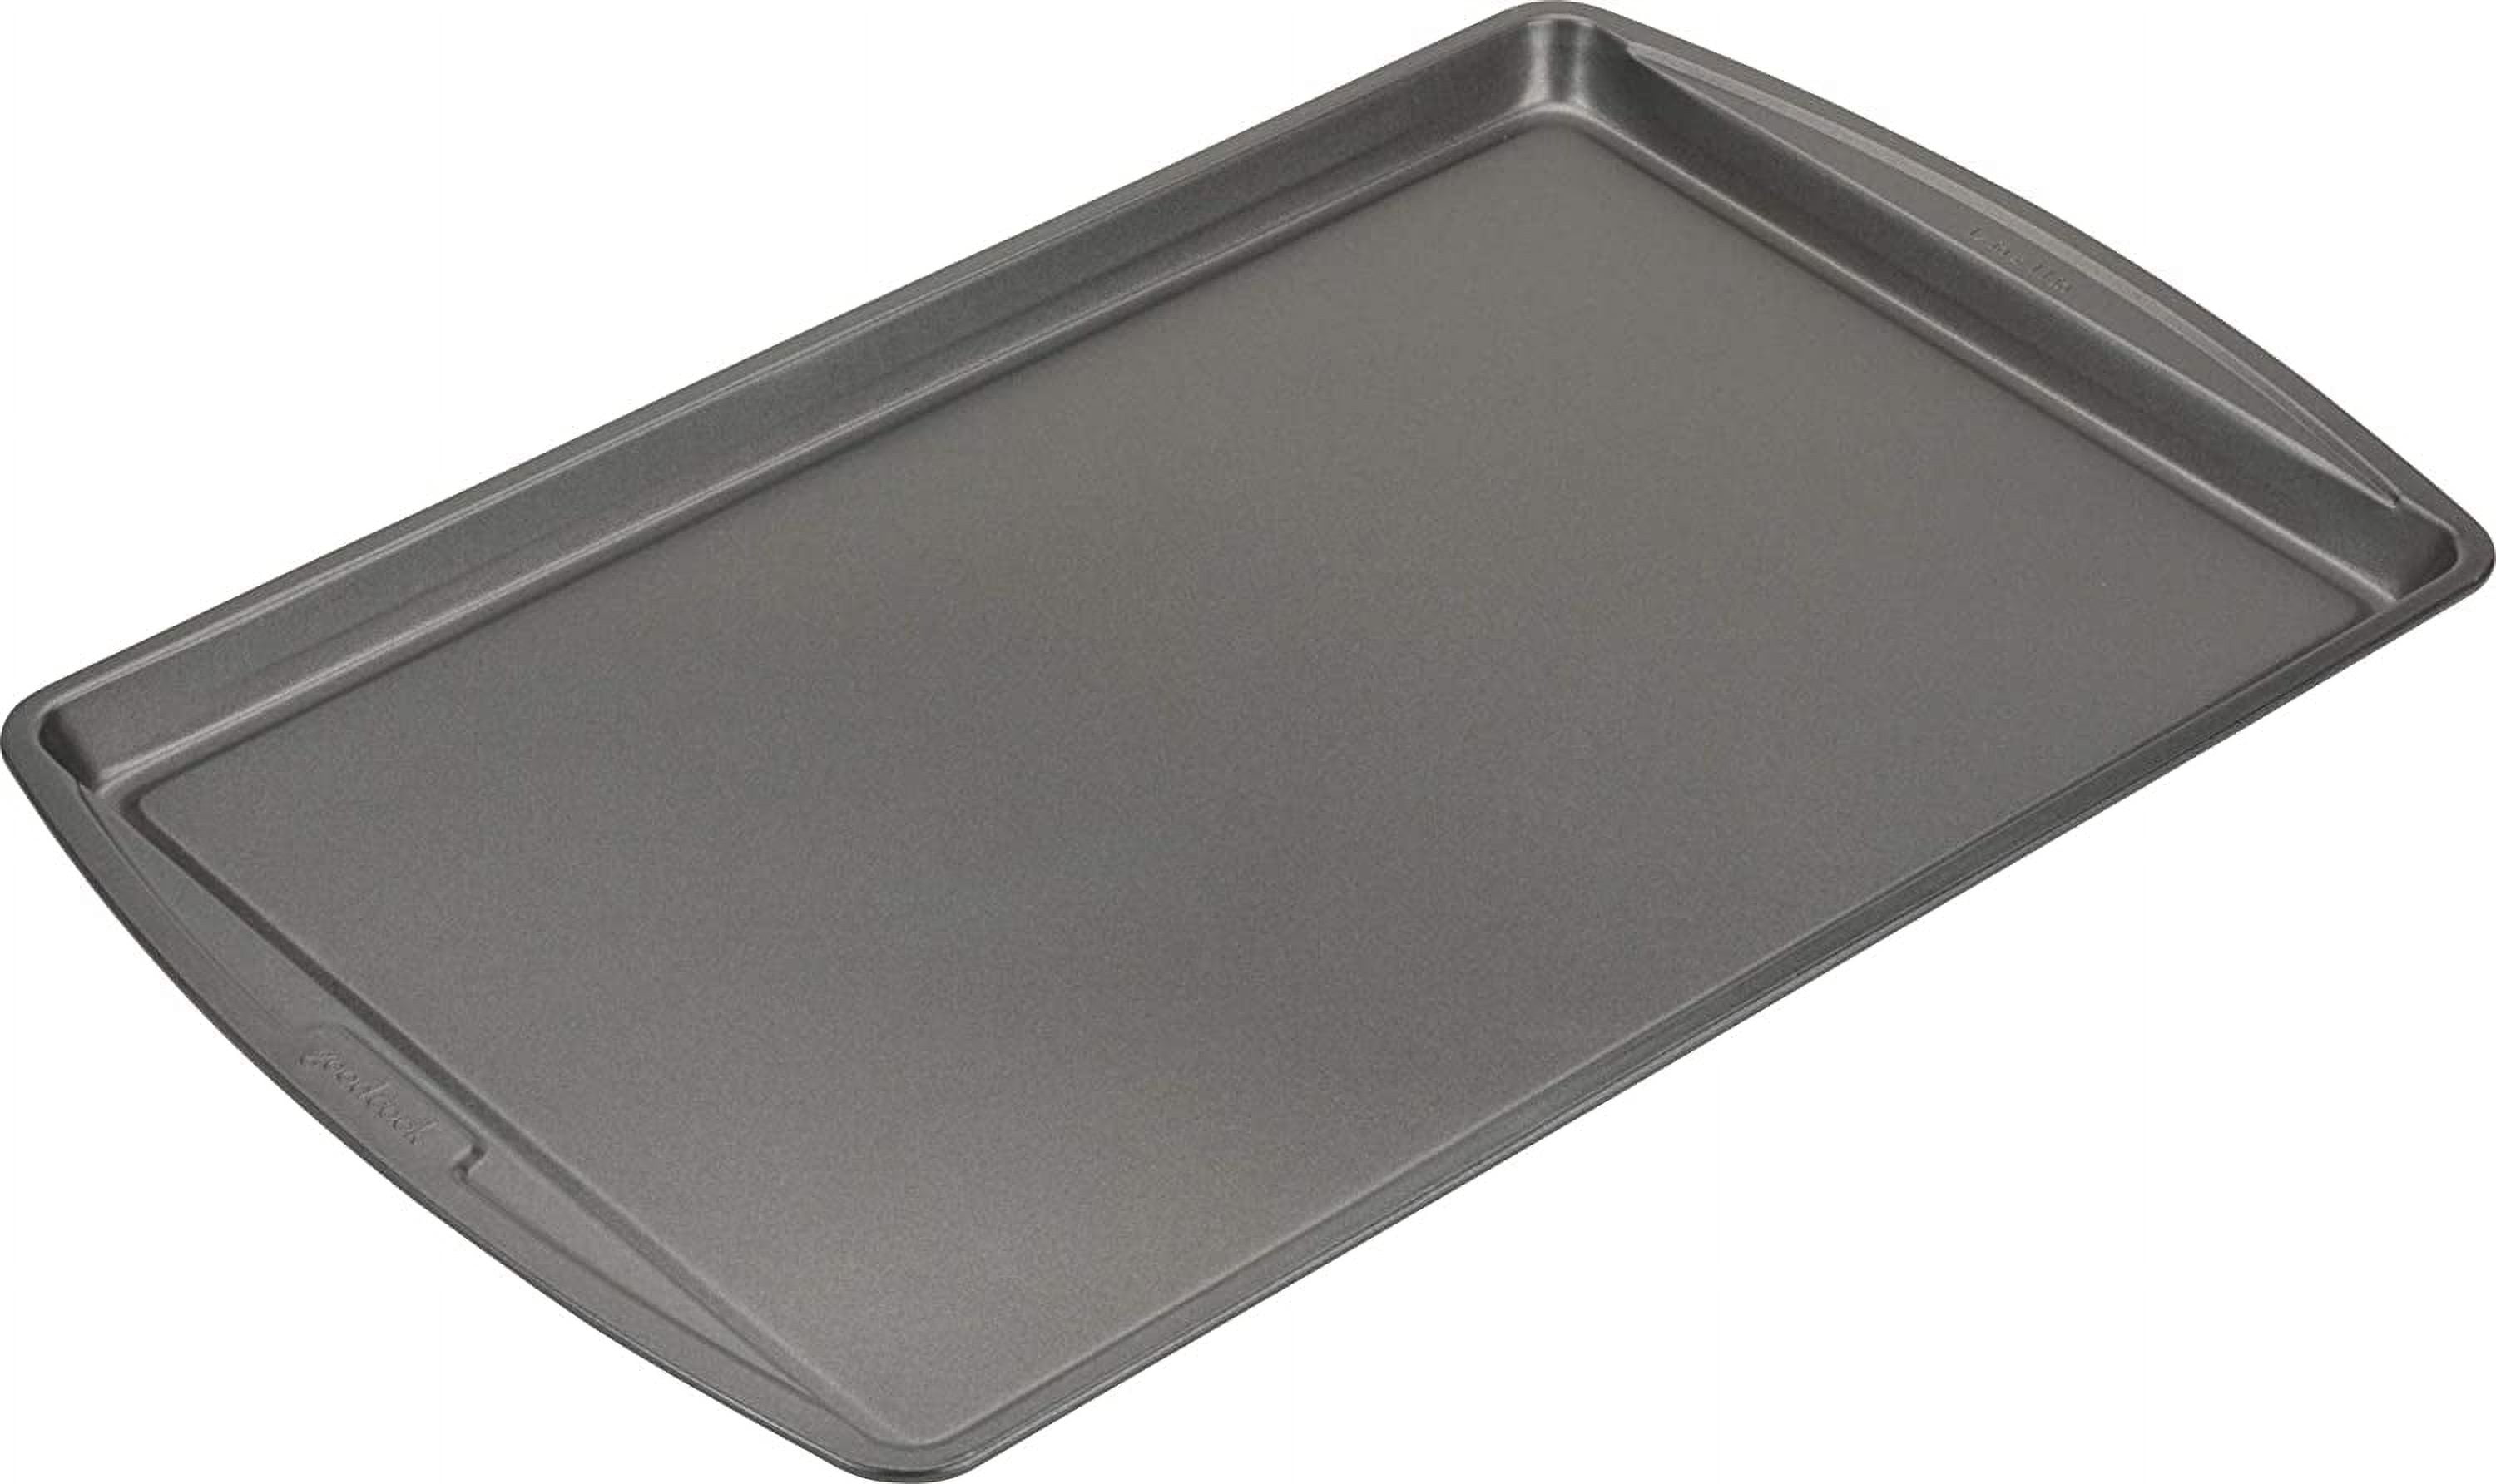 Save on Good Cook Sweet Creations Cookie Sheet Large 17 x 11 Inch